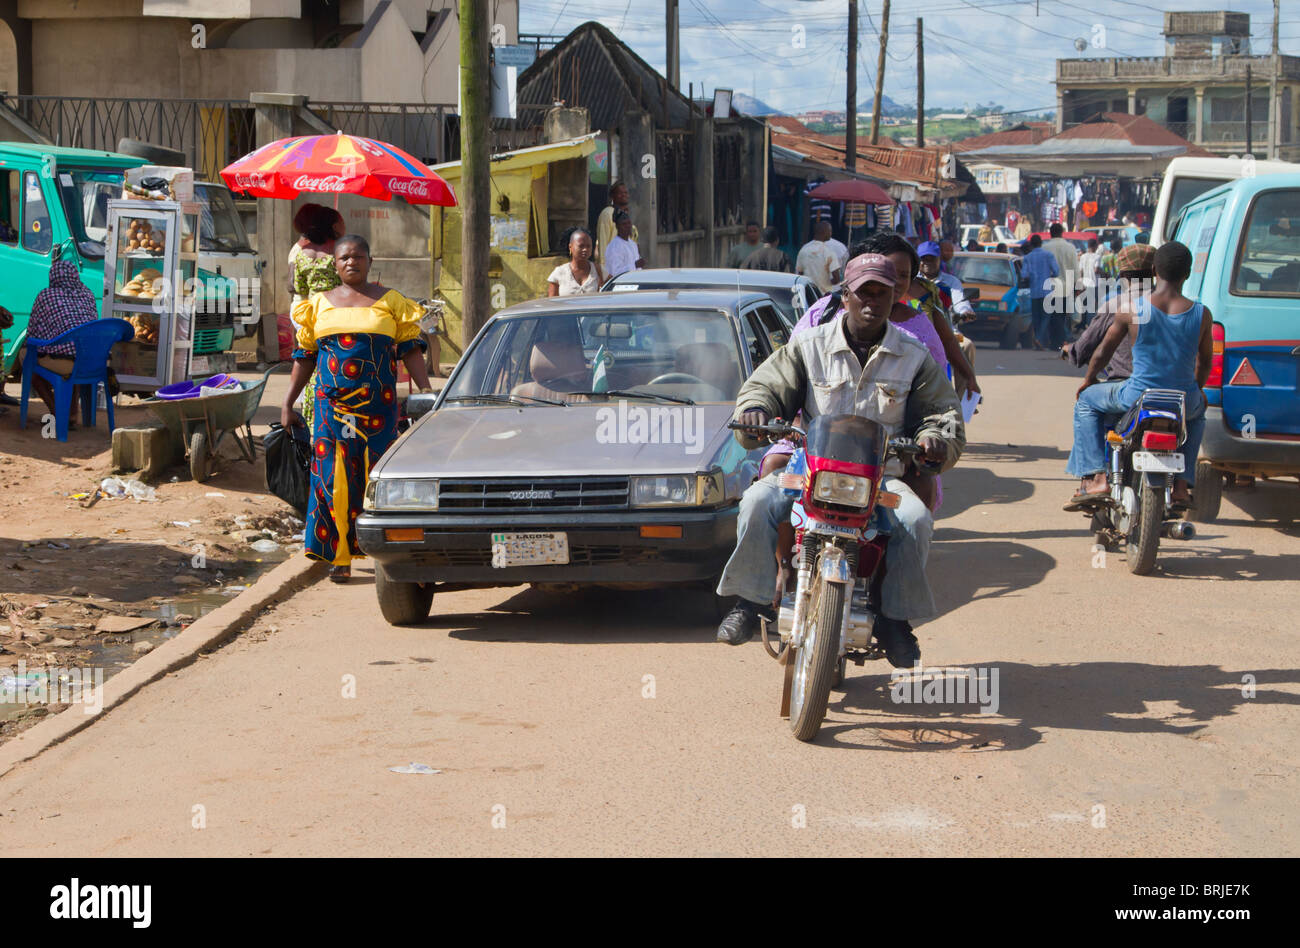 A busy street in the town of Akure, Ondo state, Nigeria. Stock Photo